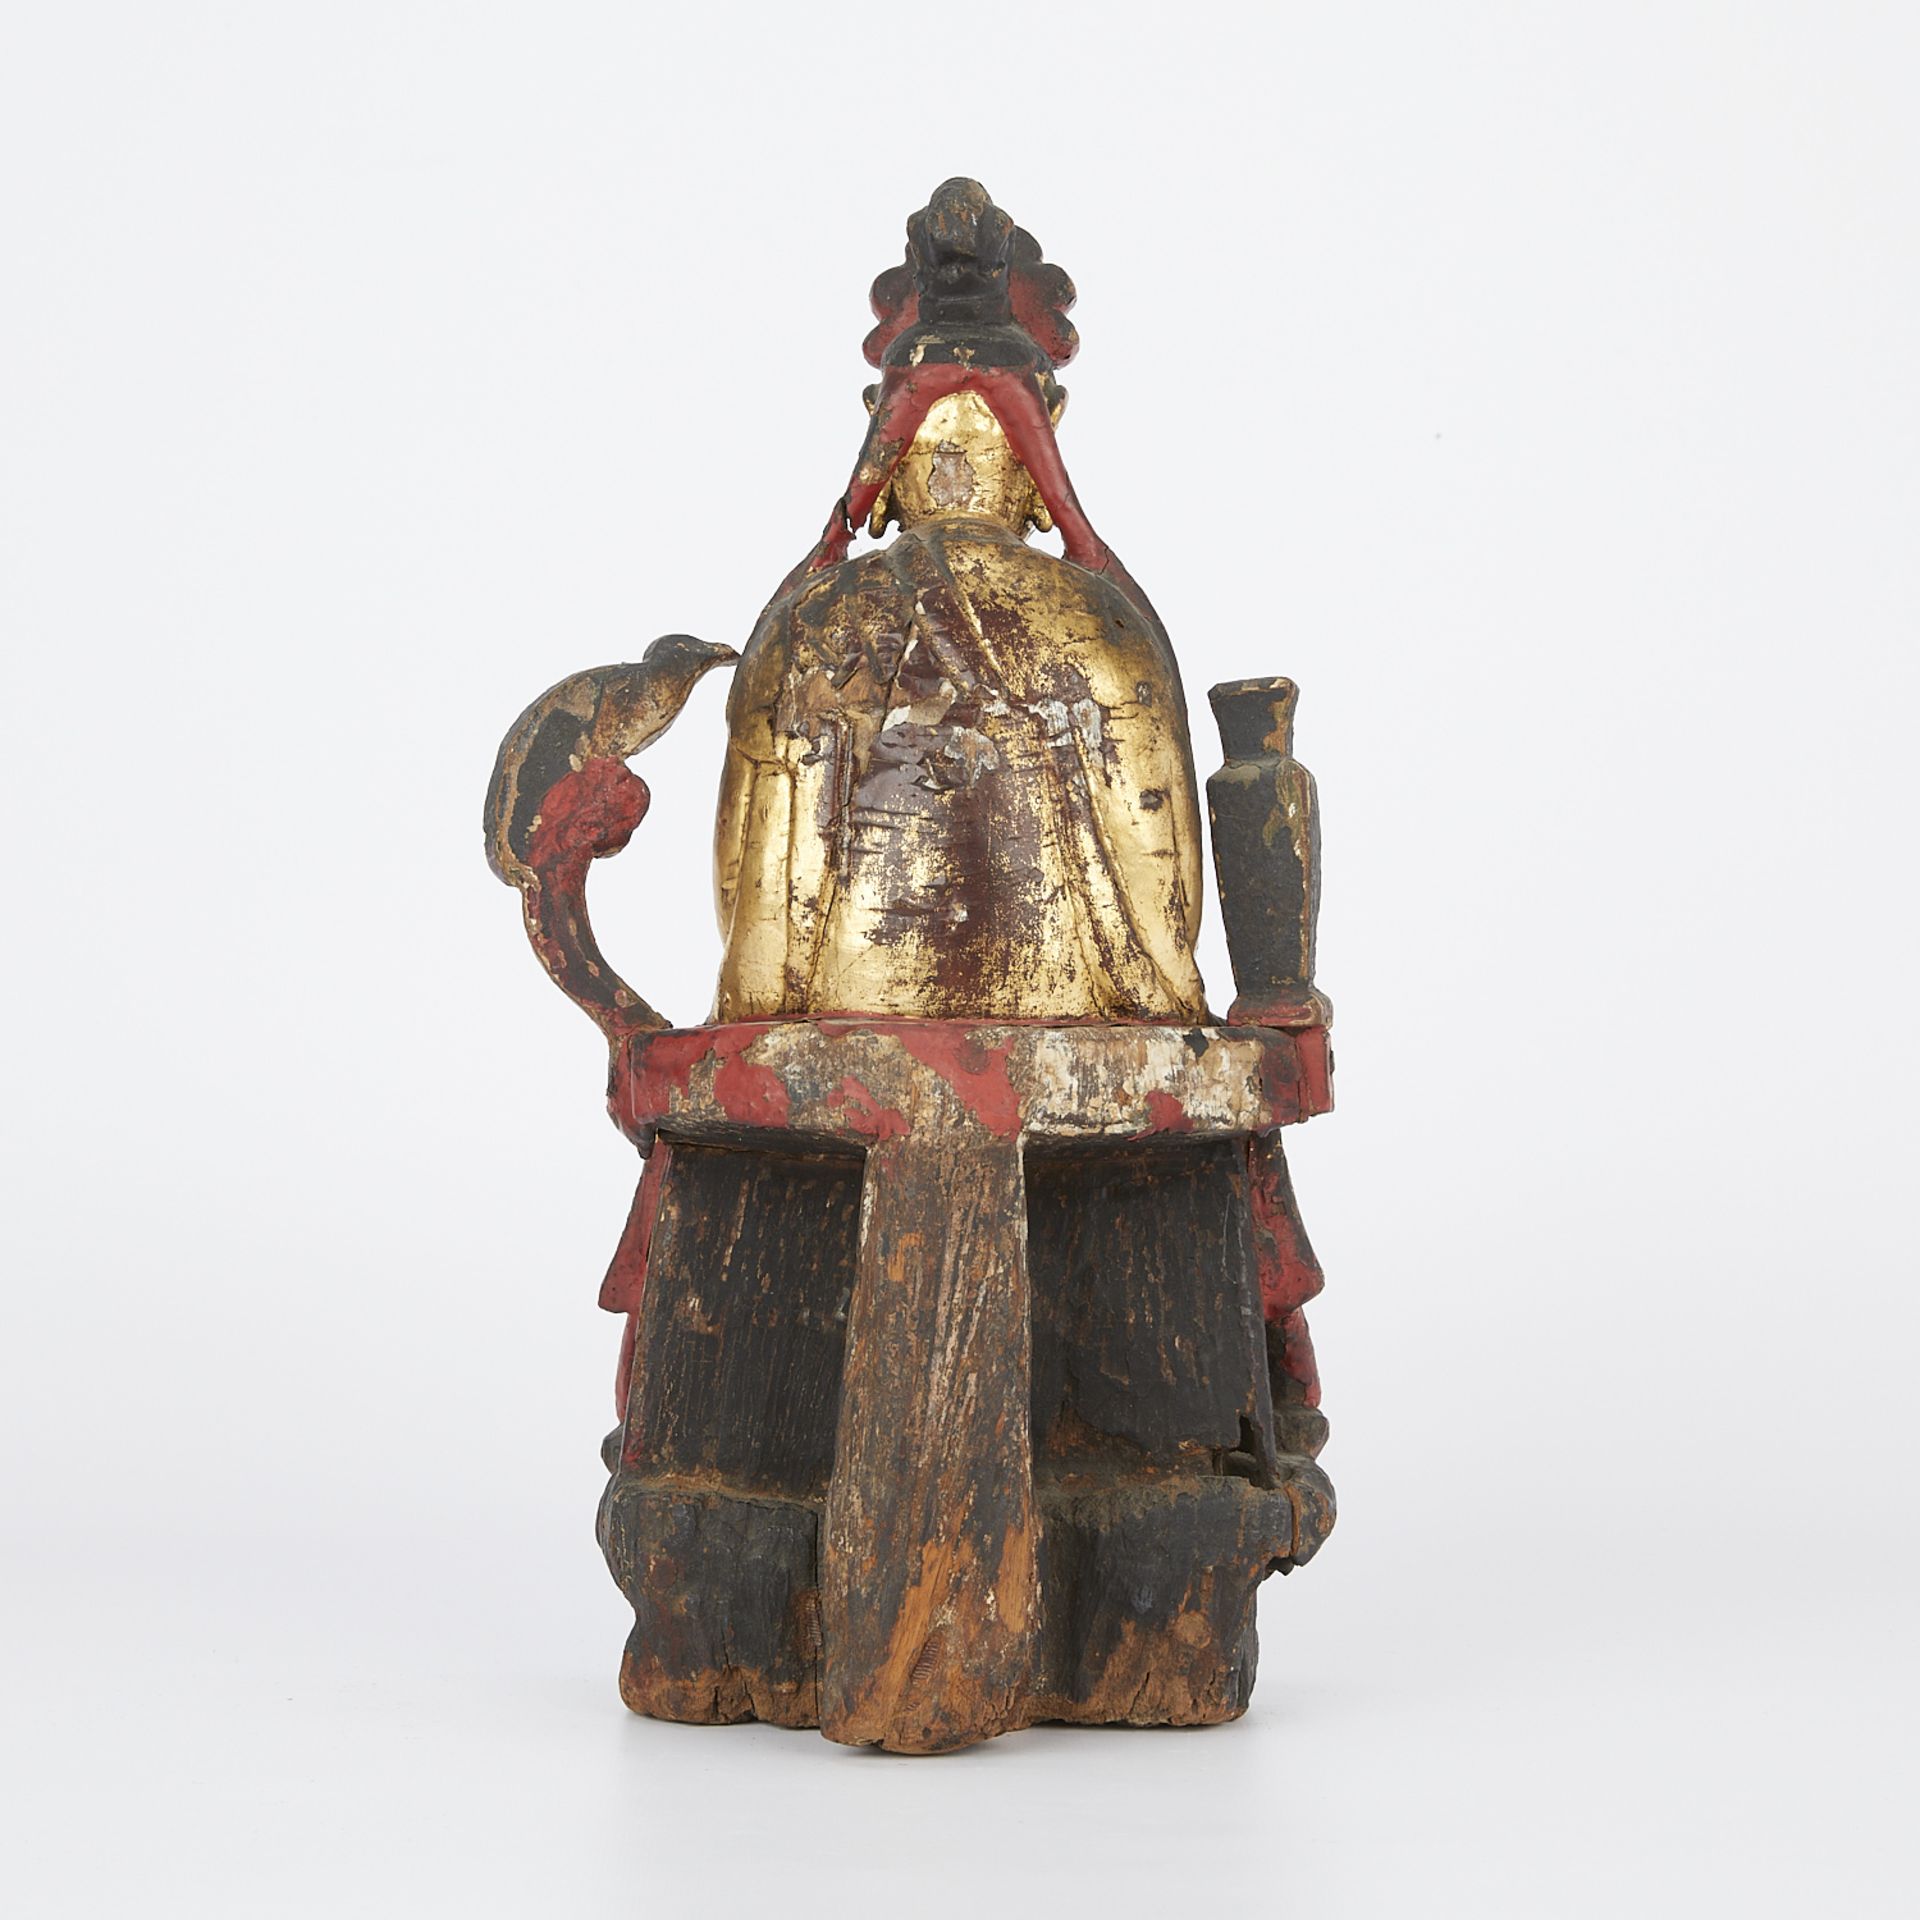 18th-19th c. Chinese Gilt Wooden Guanyin - Image 4 of 9